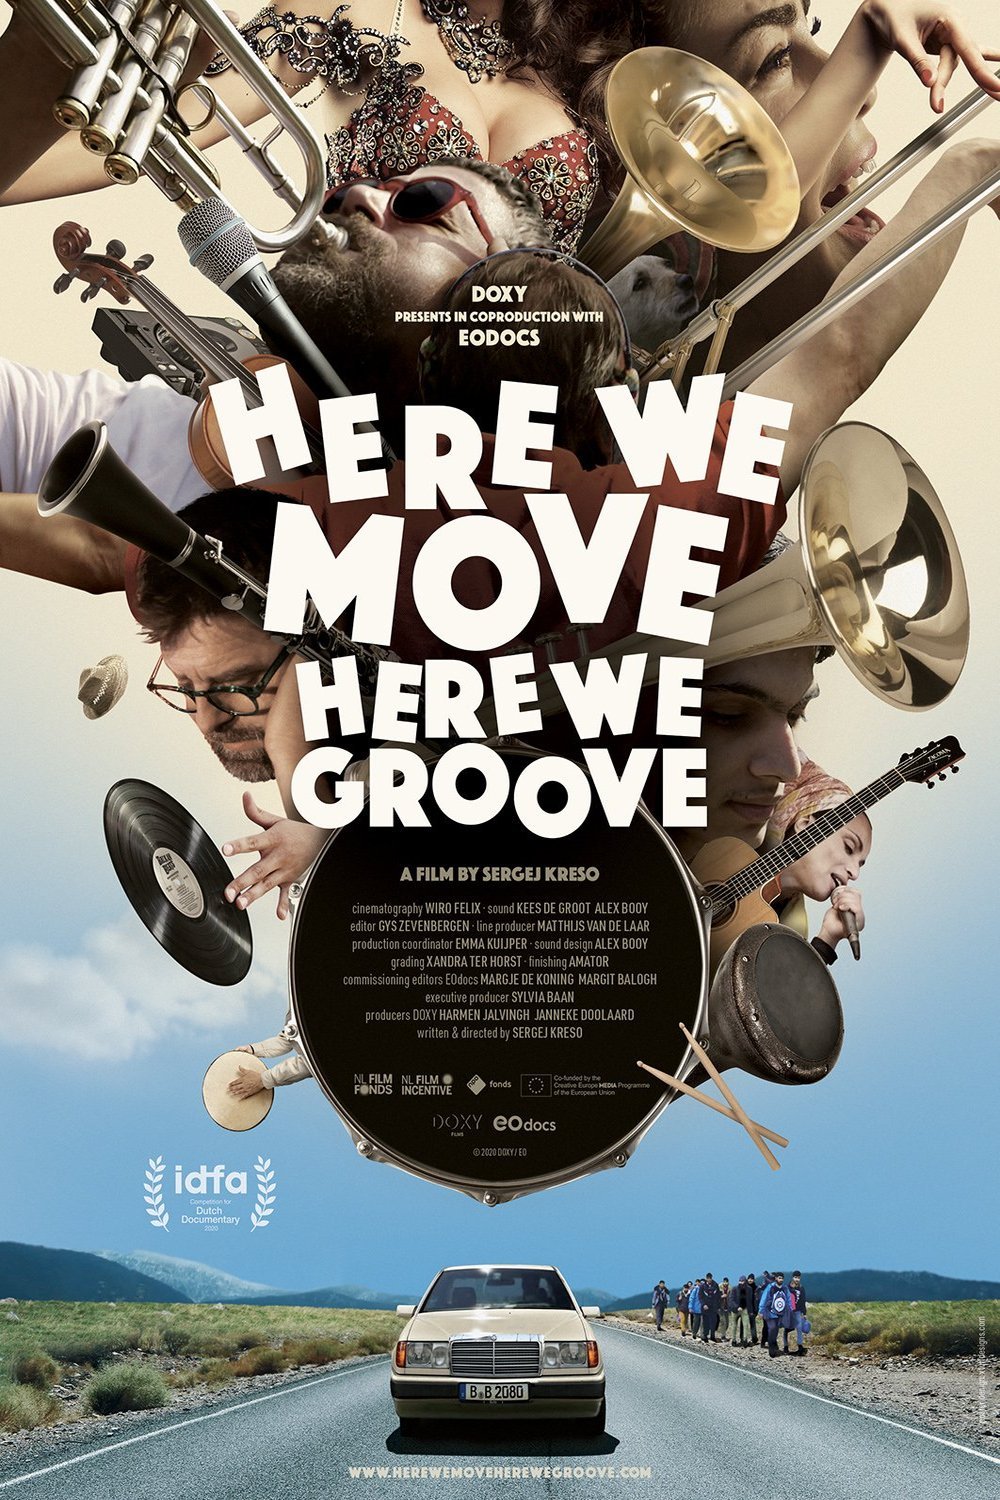 L'affiche du film Here We Move Here We Groove